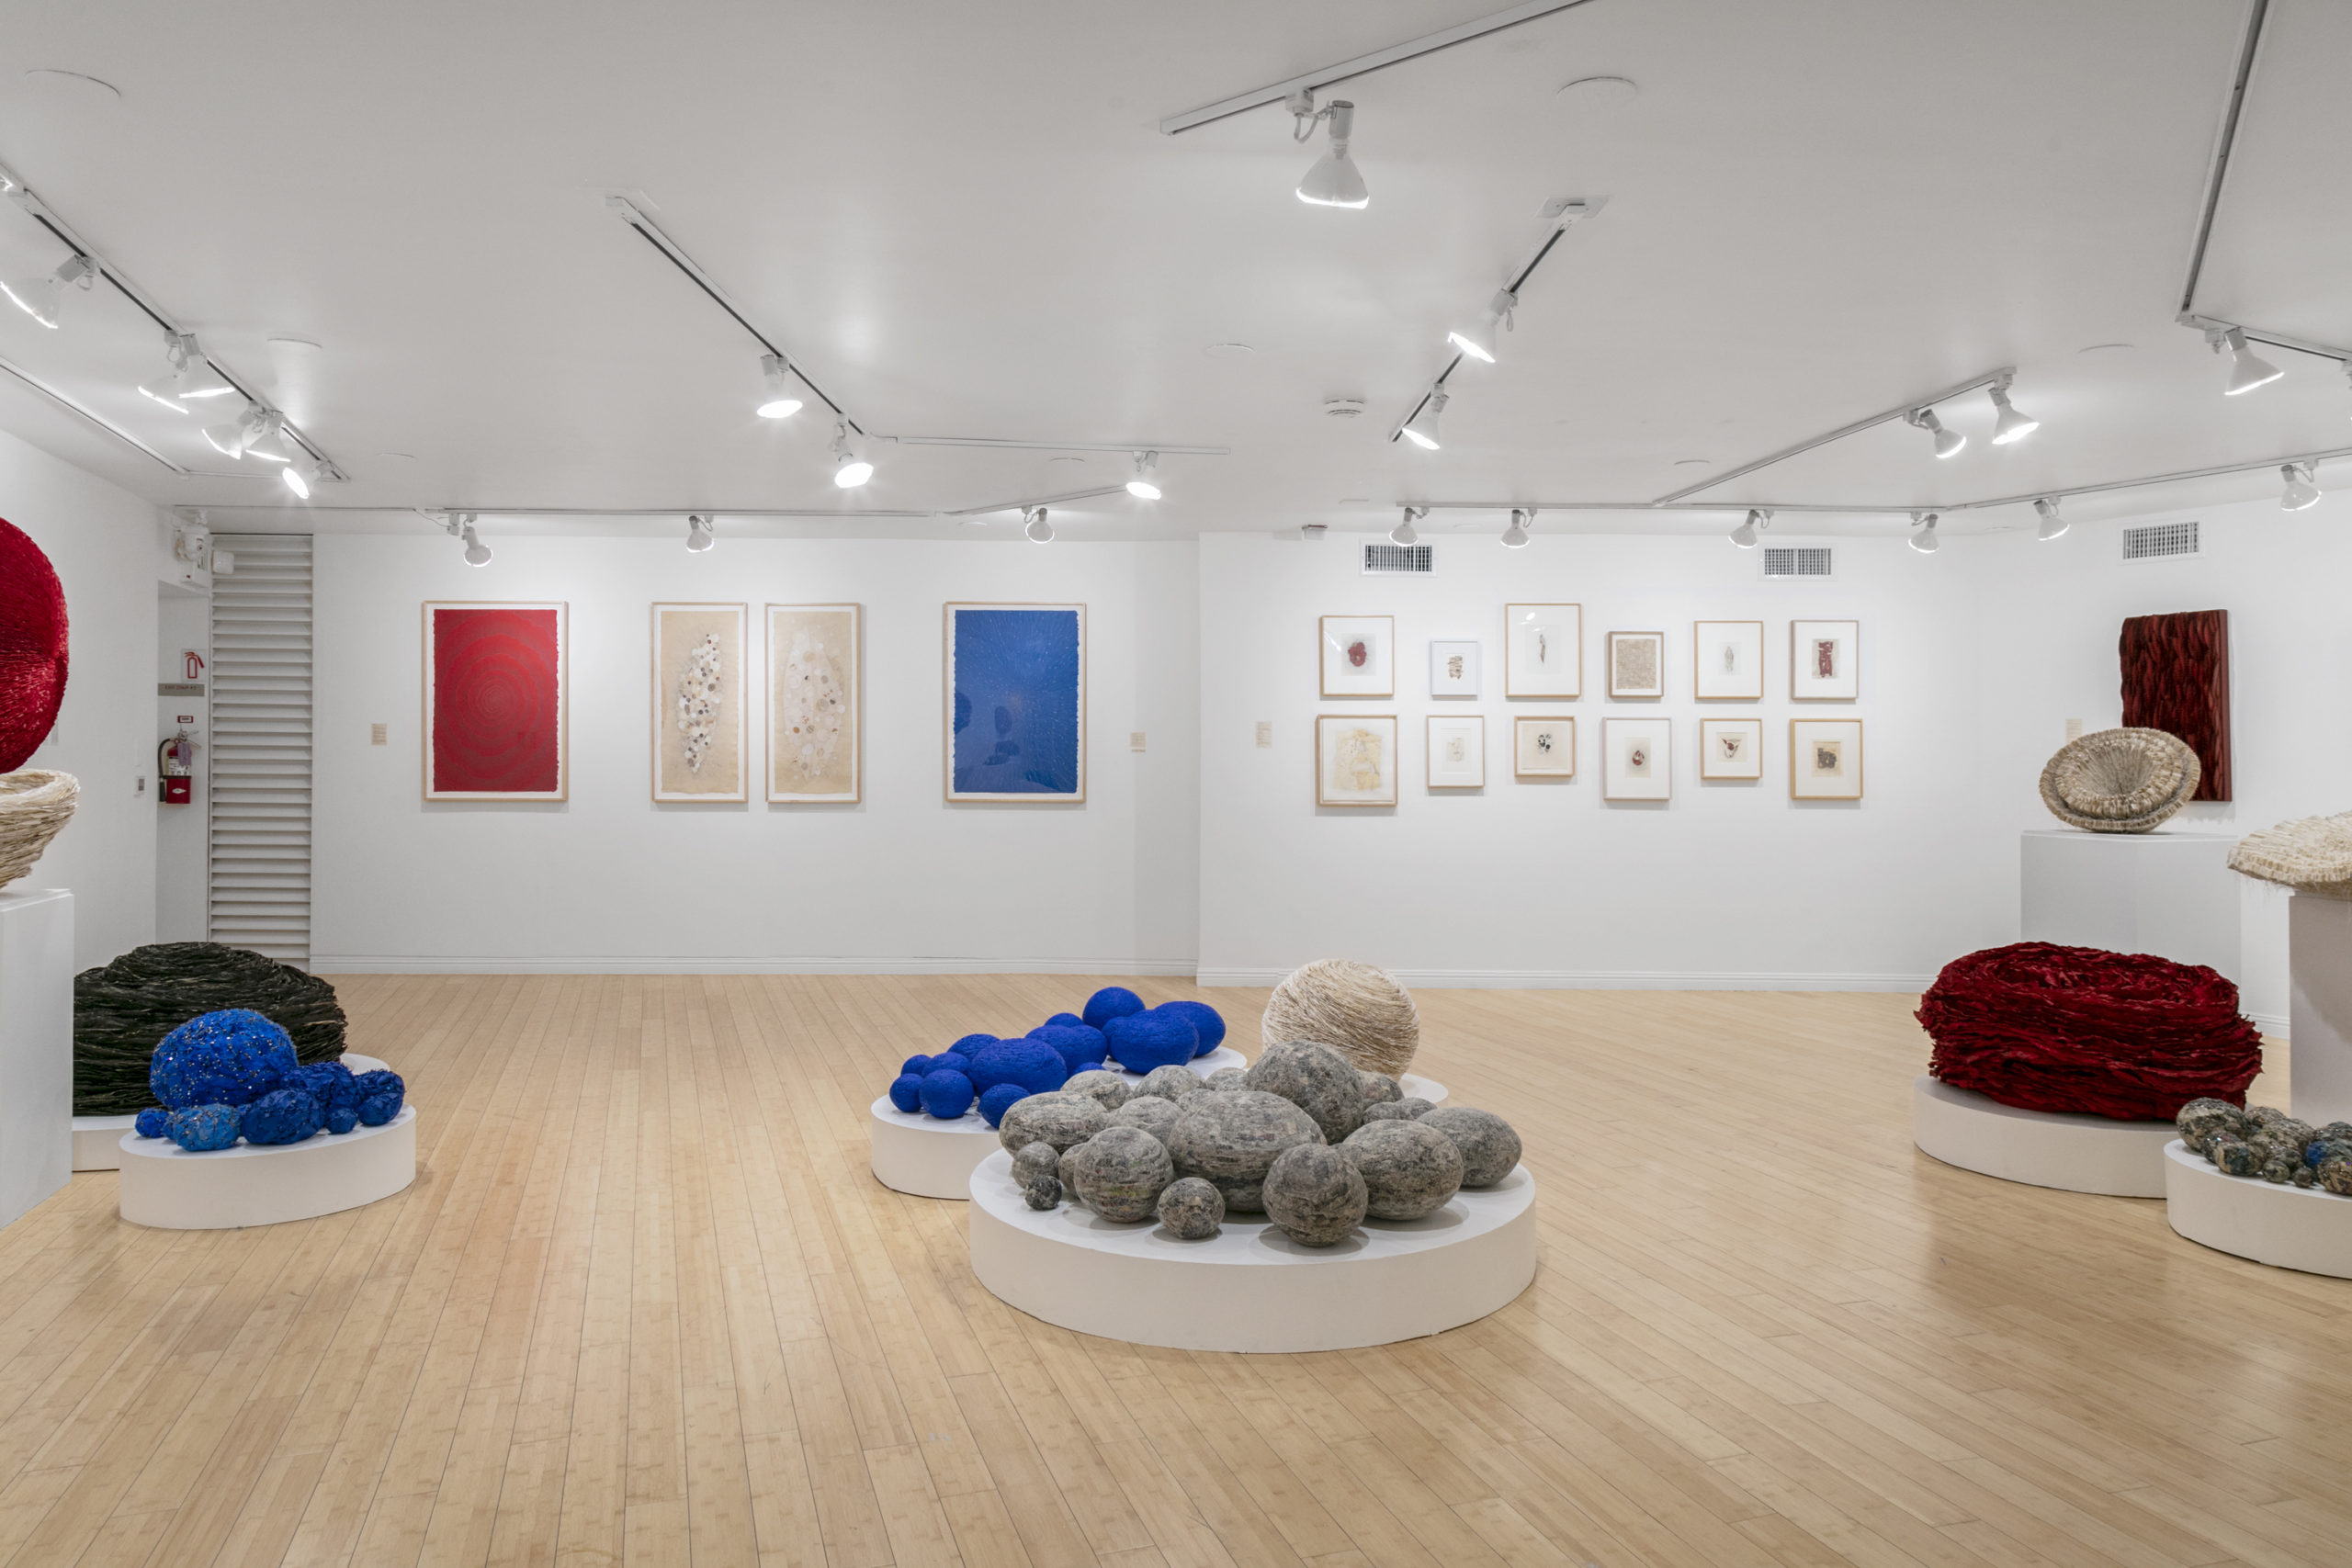 Finding The Center: Works by Echiko Ohira, installation view, 2019.